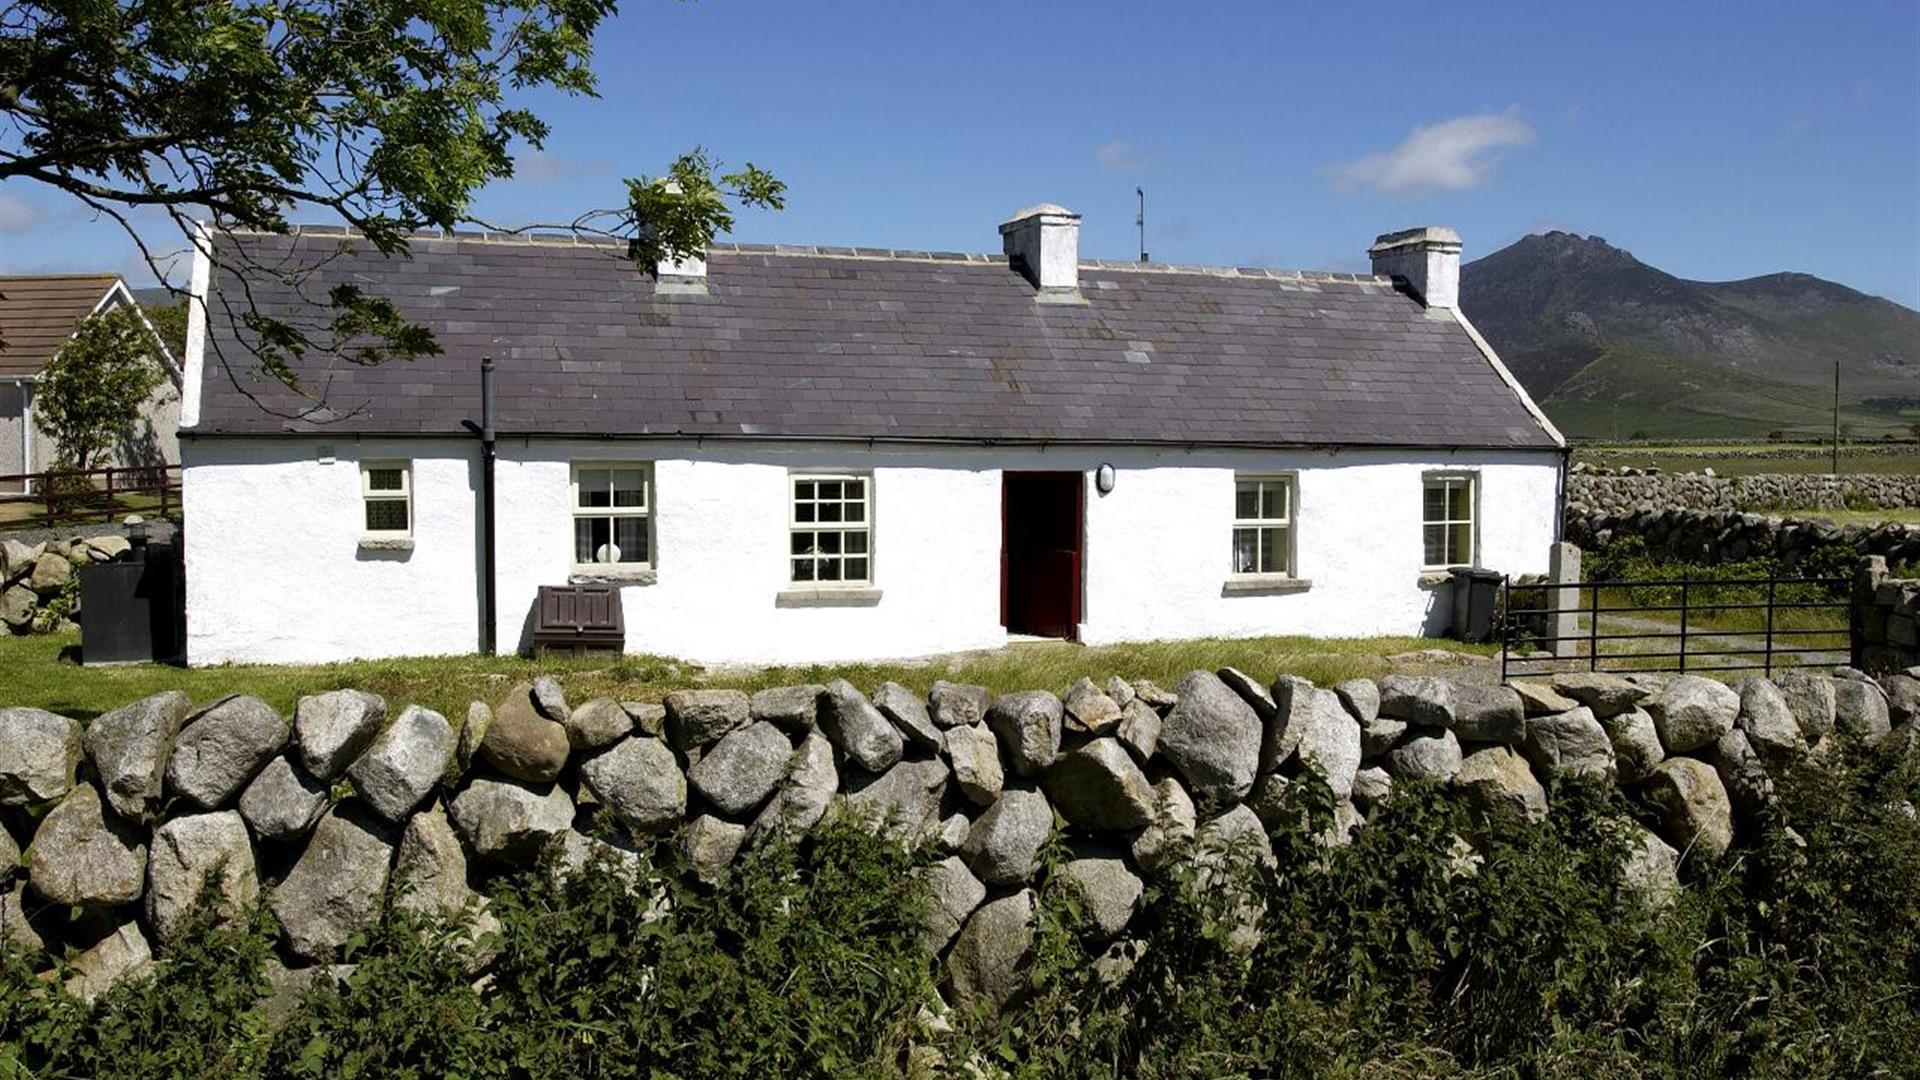 Hanna's Close Holiday Cottages - Murphy's Cottage